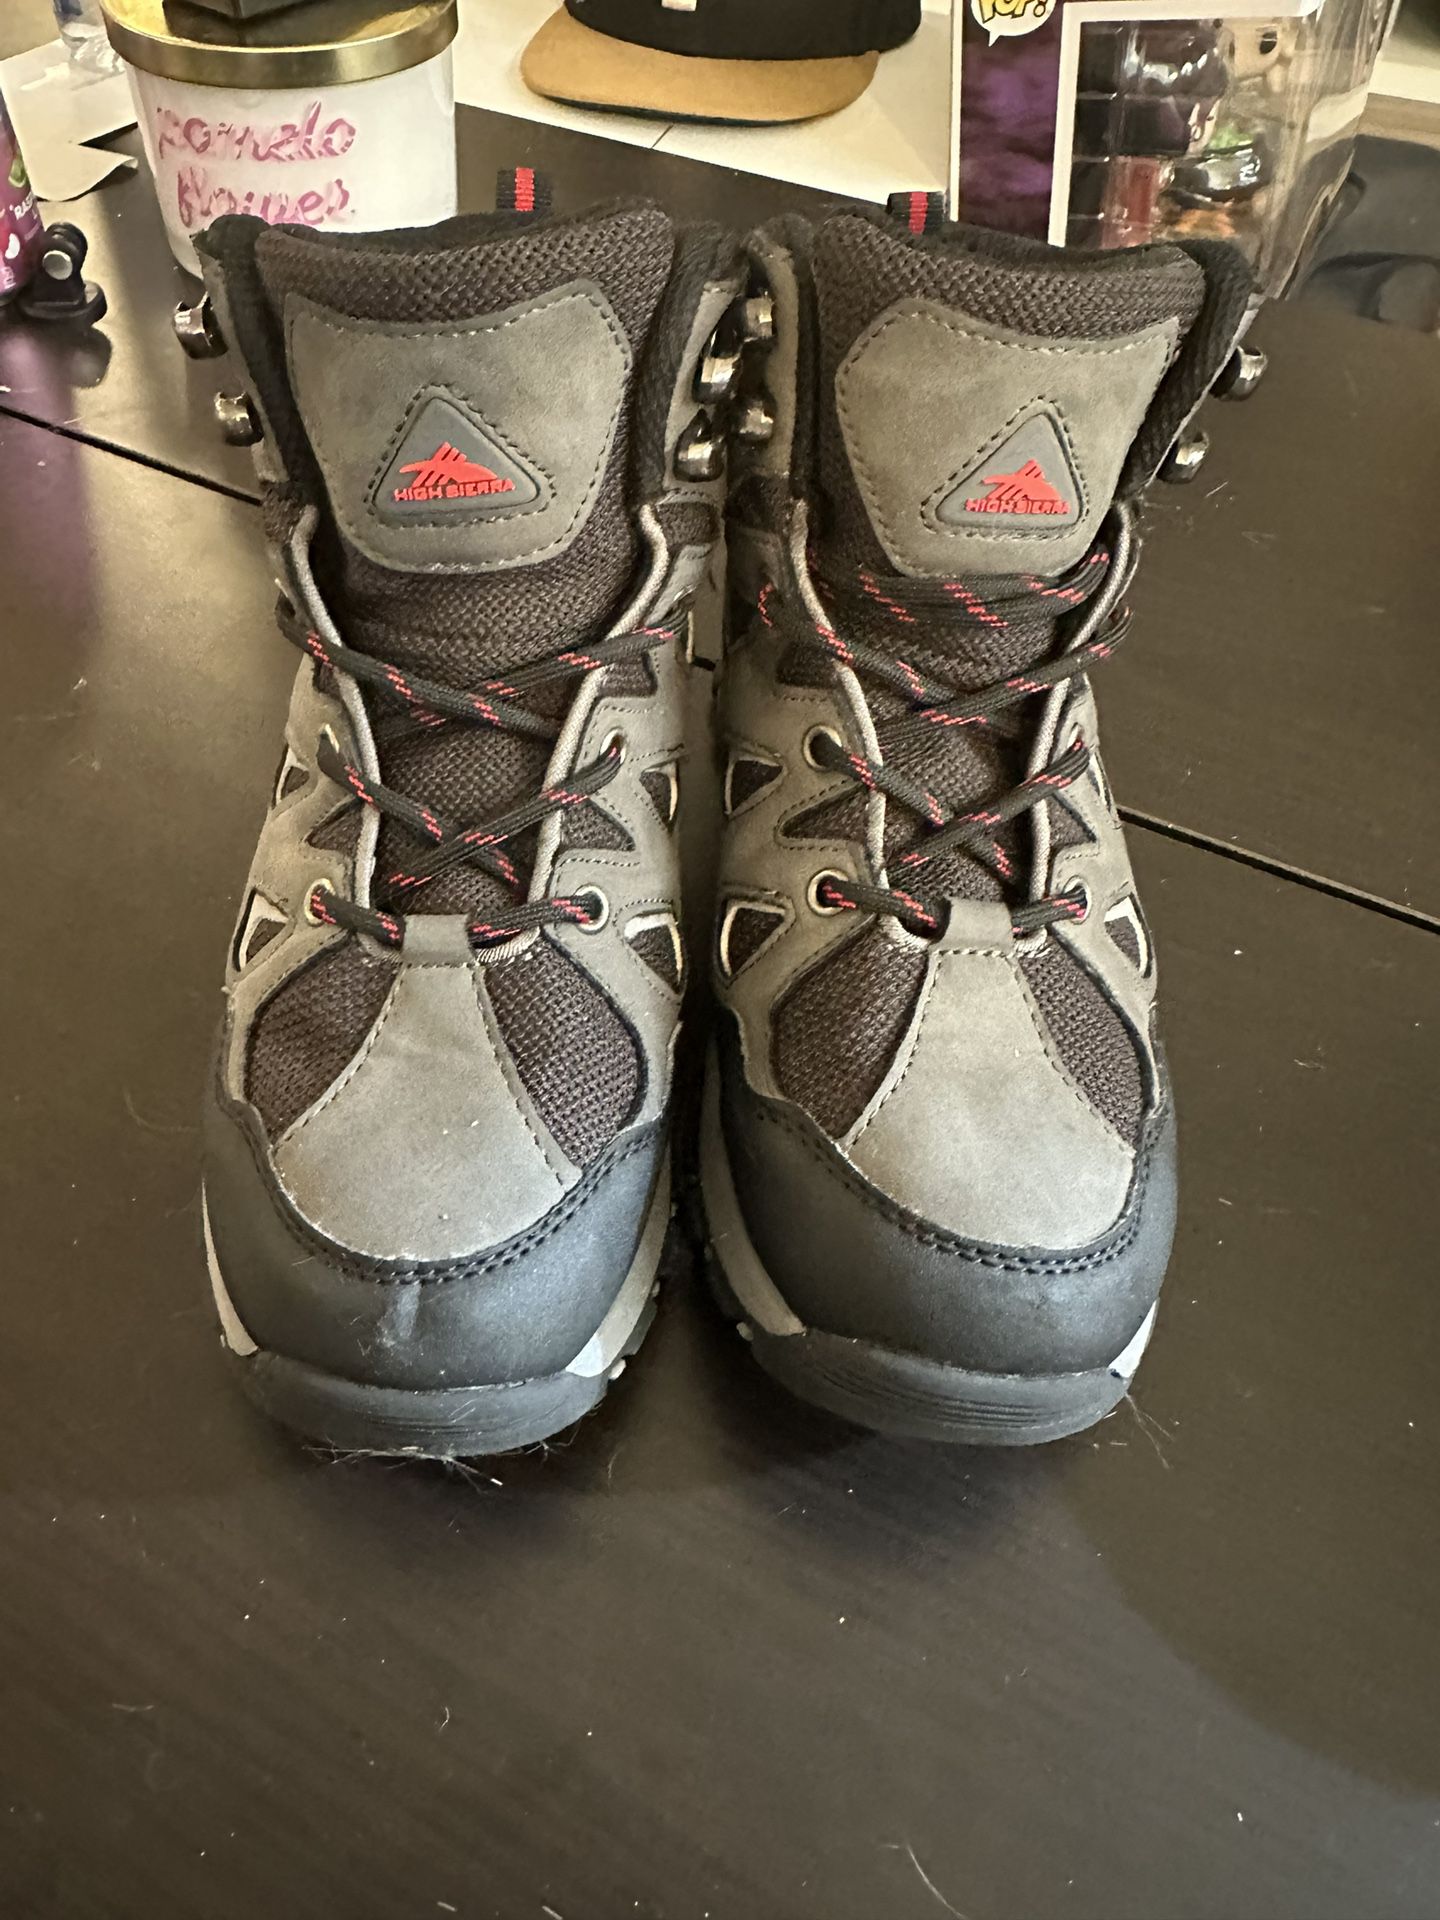 Boys hiking boots 